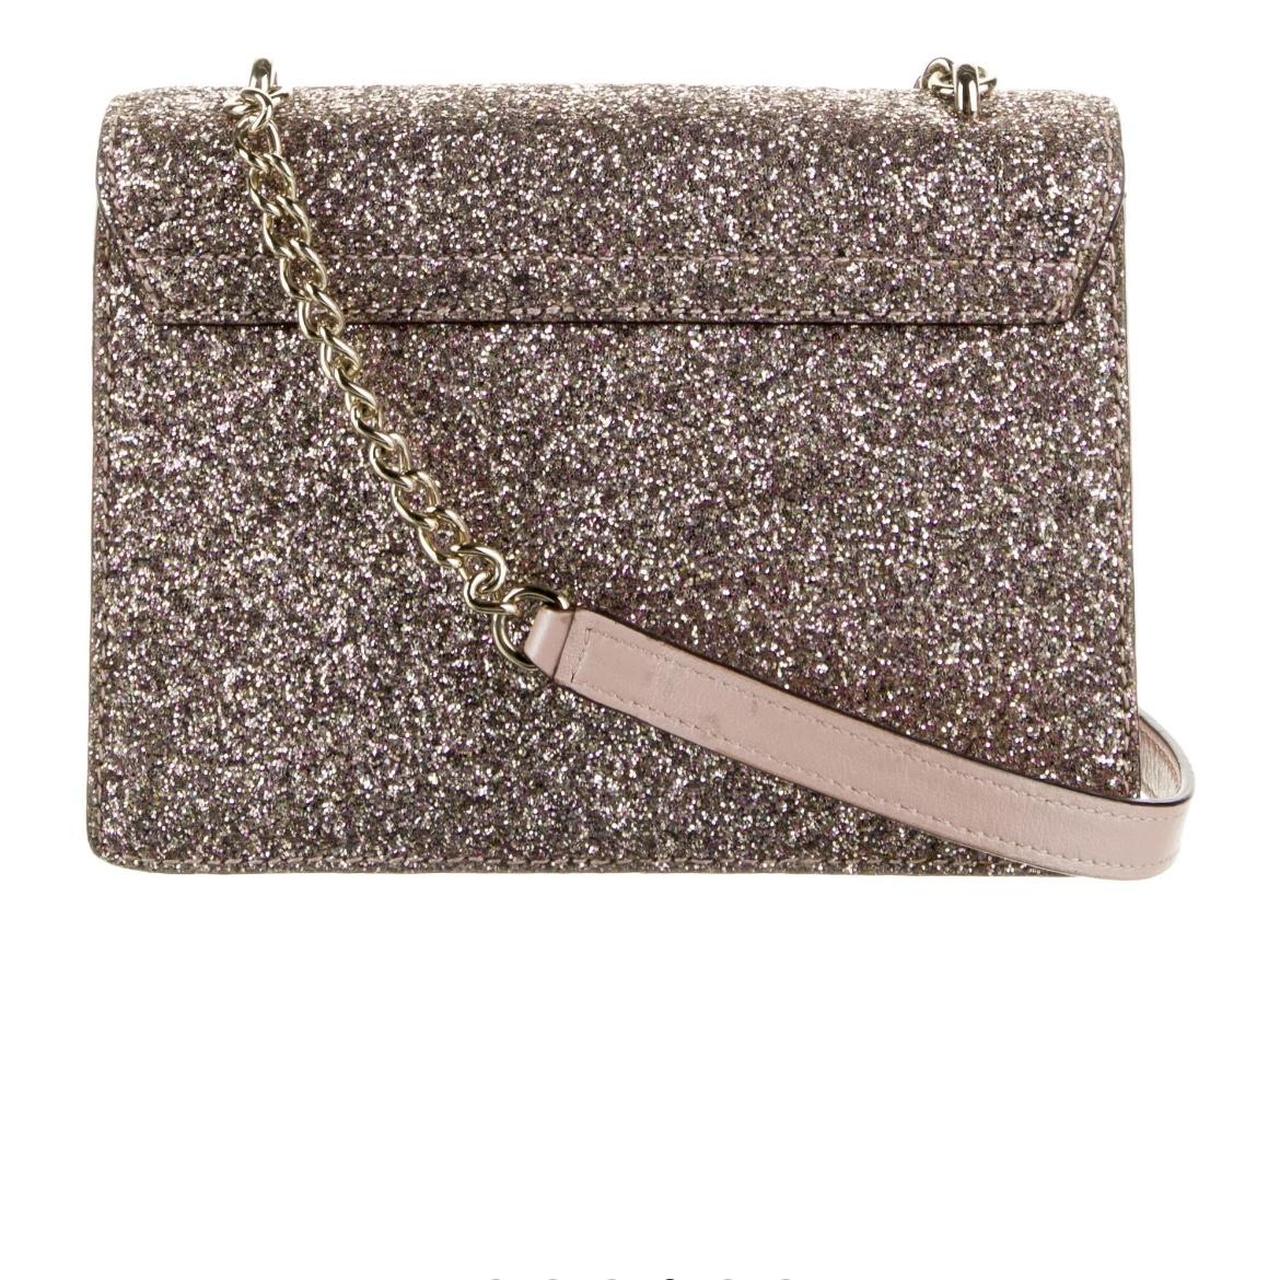 Kate Spade New York  Women's Pink and Silver Bag (4)